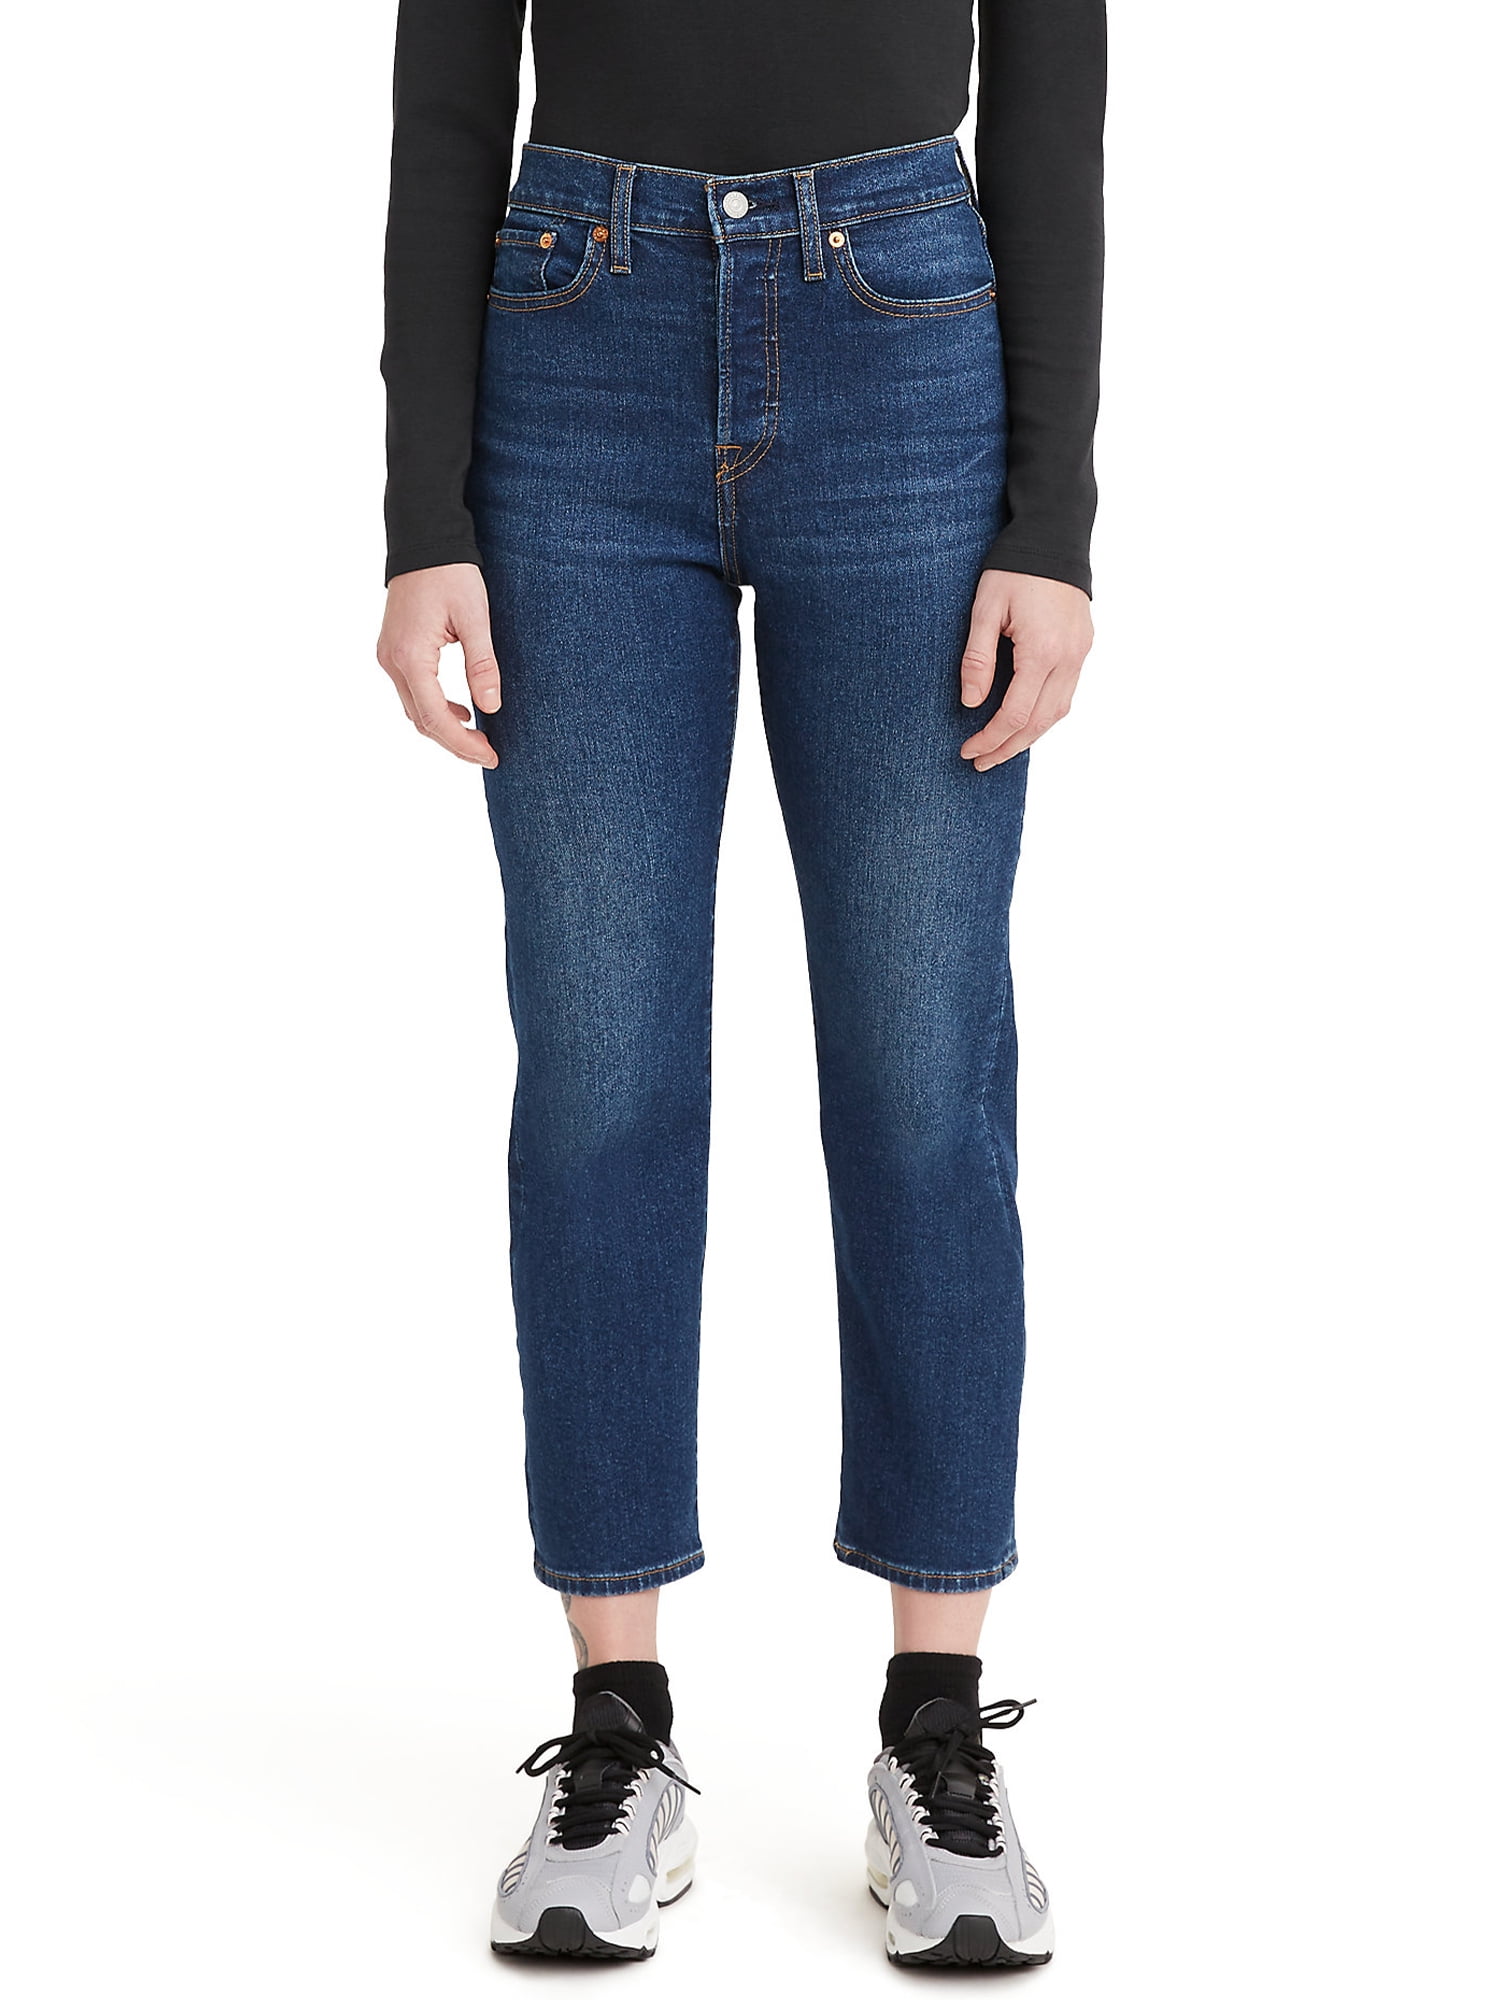 Levi's Original Red Tab Women's Wedgie Straight Jeans 